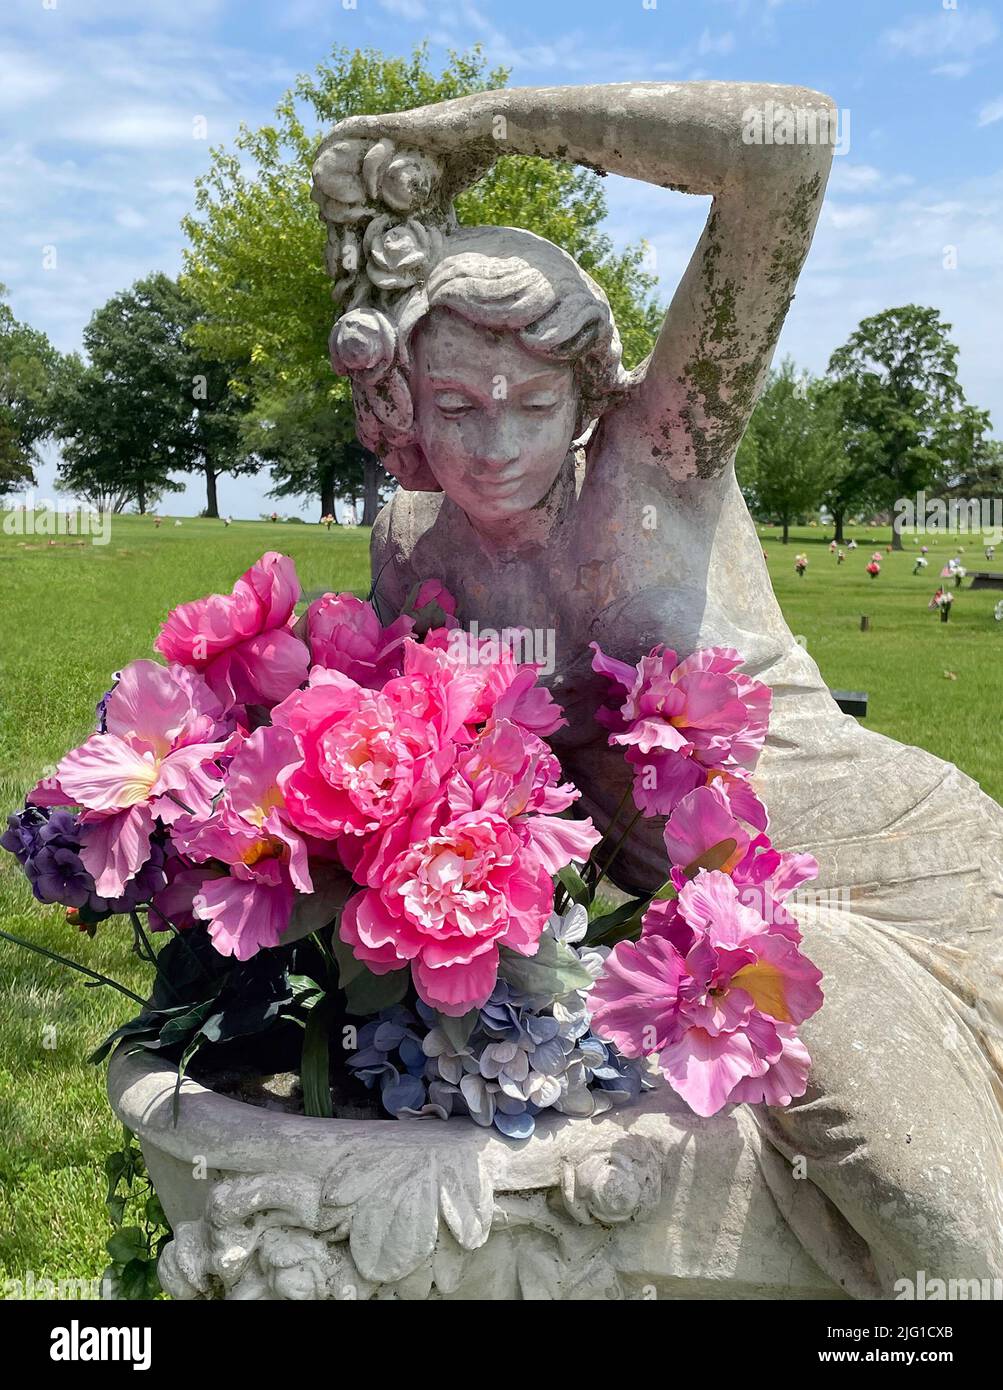 Statue of maiden holding flowers in cemetery. Stock Photo